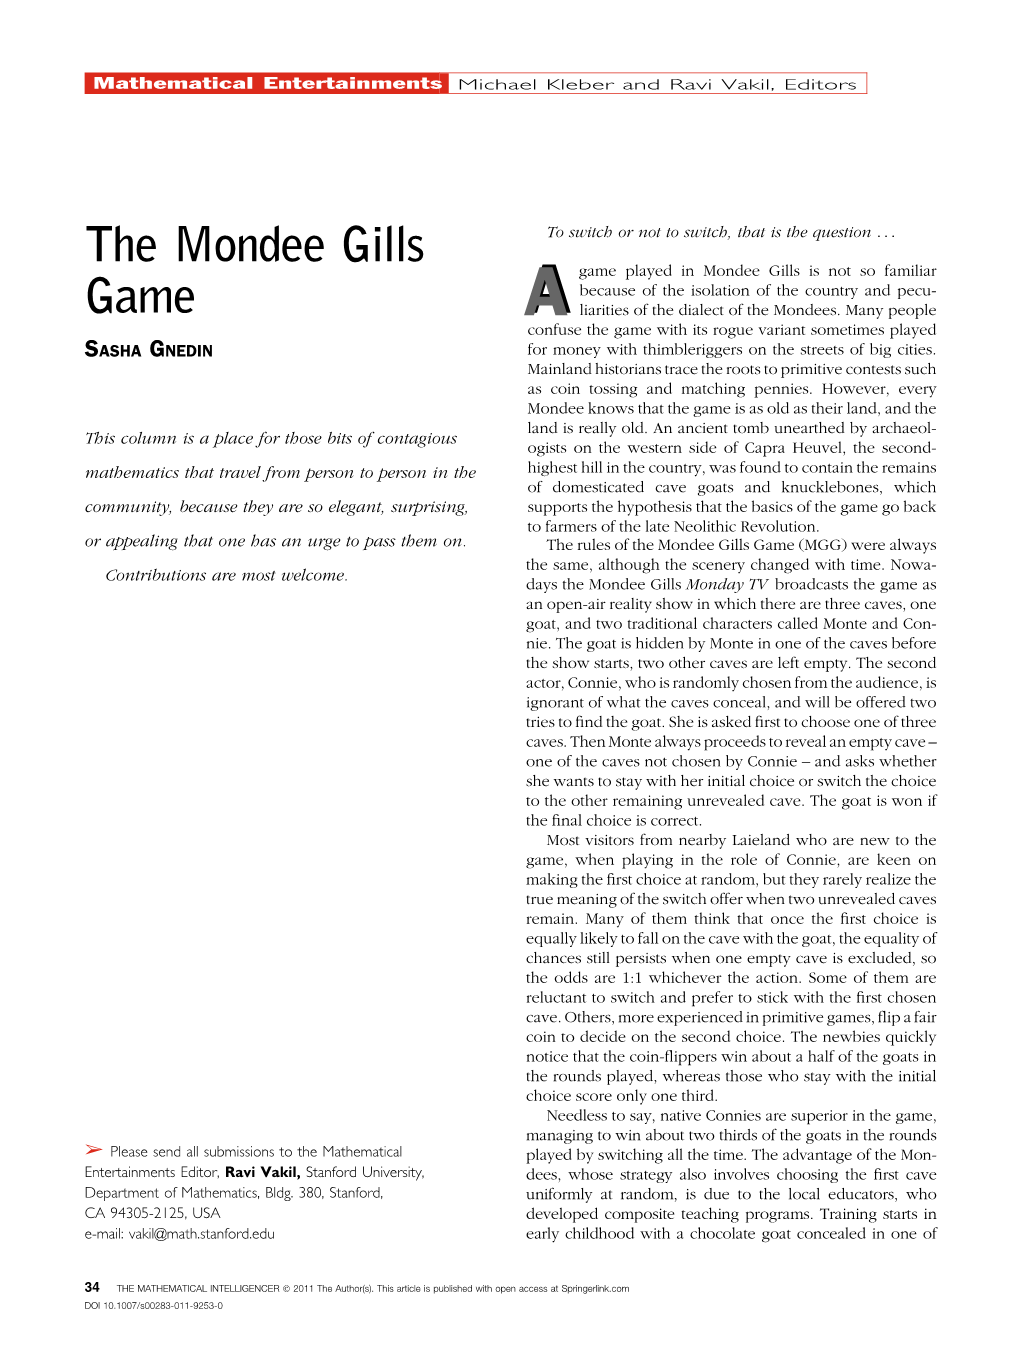 The Mondee Gills Game (MGG) Were Always the Same, Although the Scenery Changed with Time